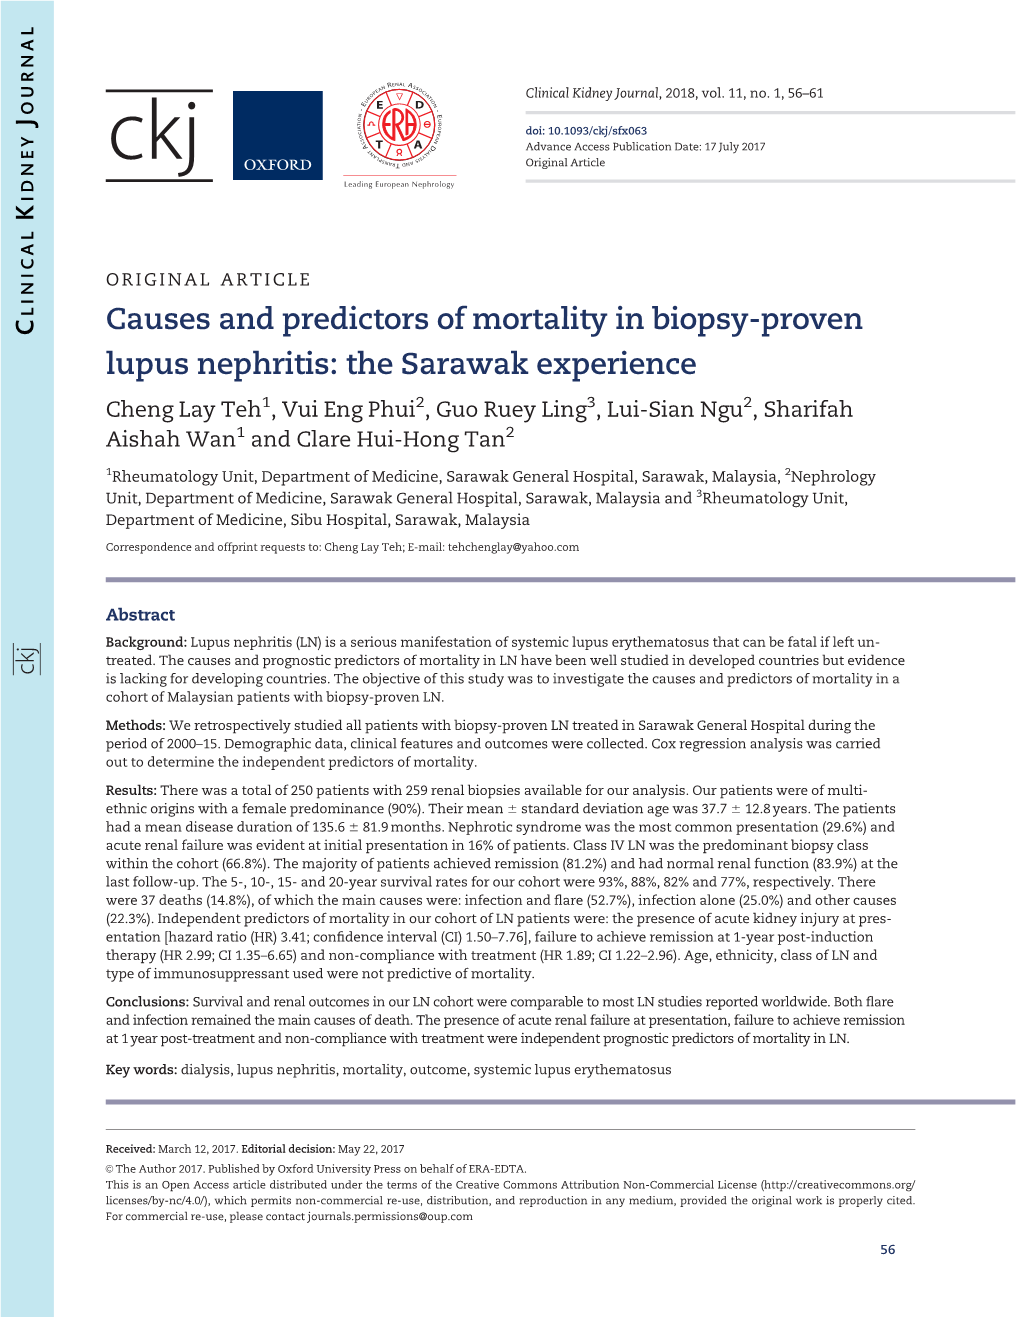 Causes and Predictors of Mortality in Biopsy-Proven Lupus Nephritis